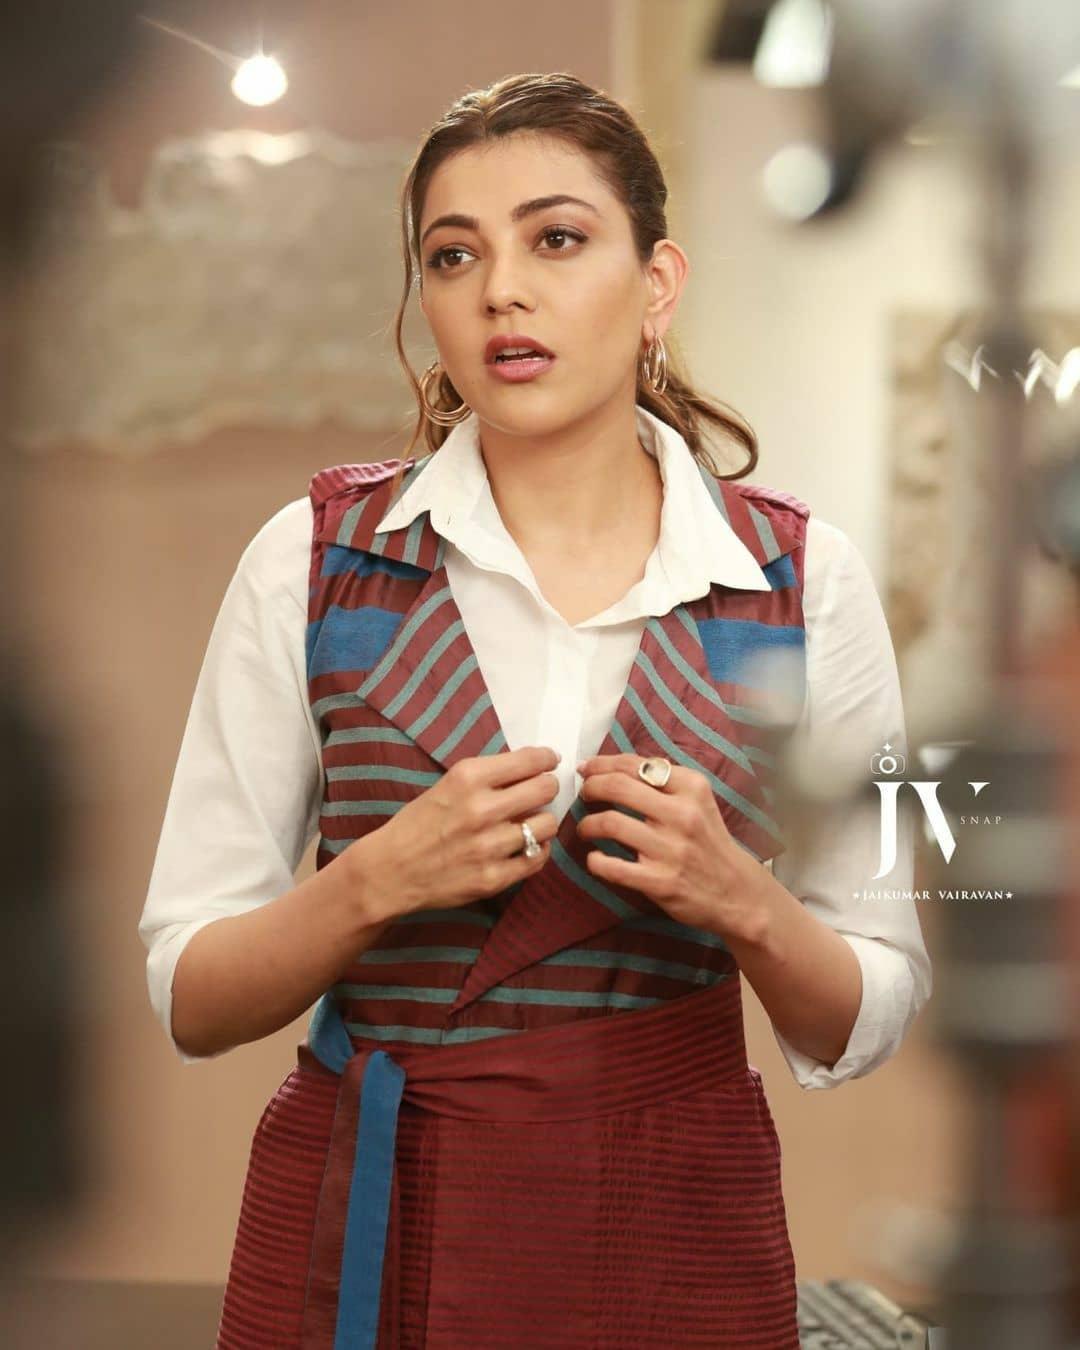 South Indian actress Kajal Aggarwal looking very cute photos |Kajal Aggarwal  exposing hot photos gallery Photos: HD Images, Pictures, Stills, First Look  Posters of South Indian actress Kajal Aggarwal looking very cute